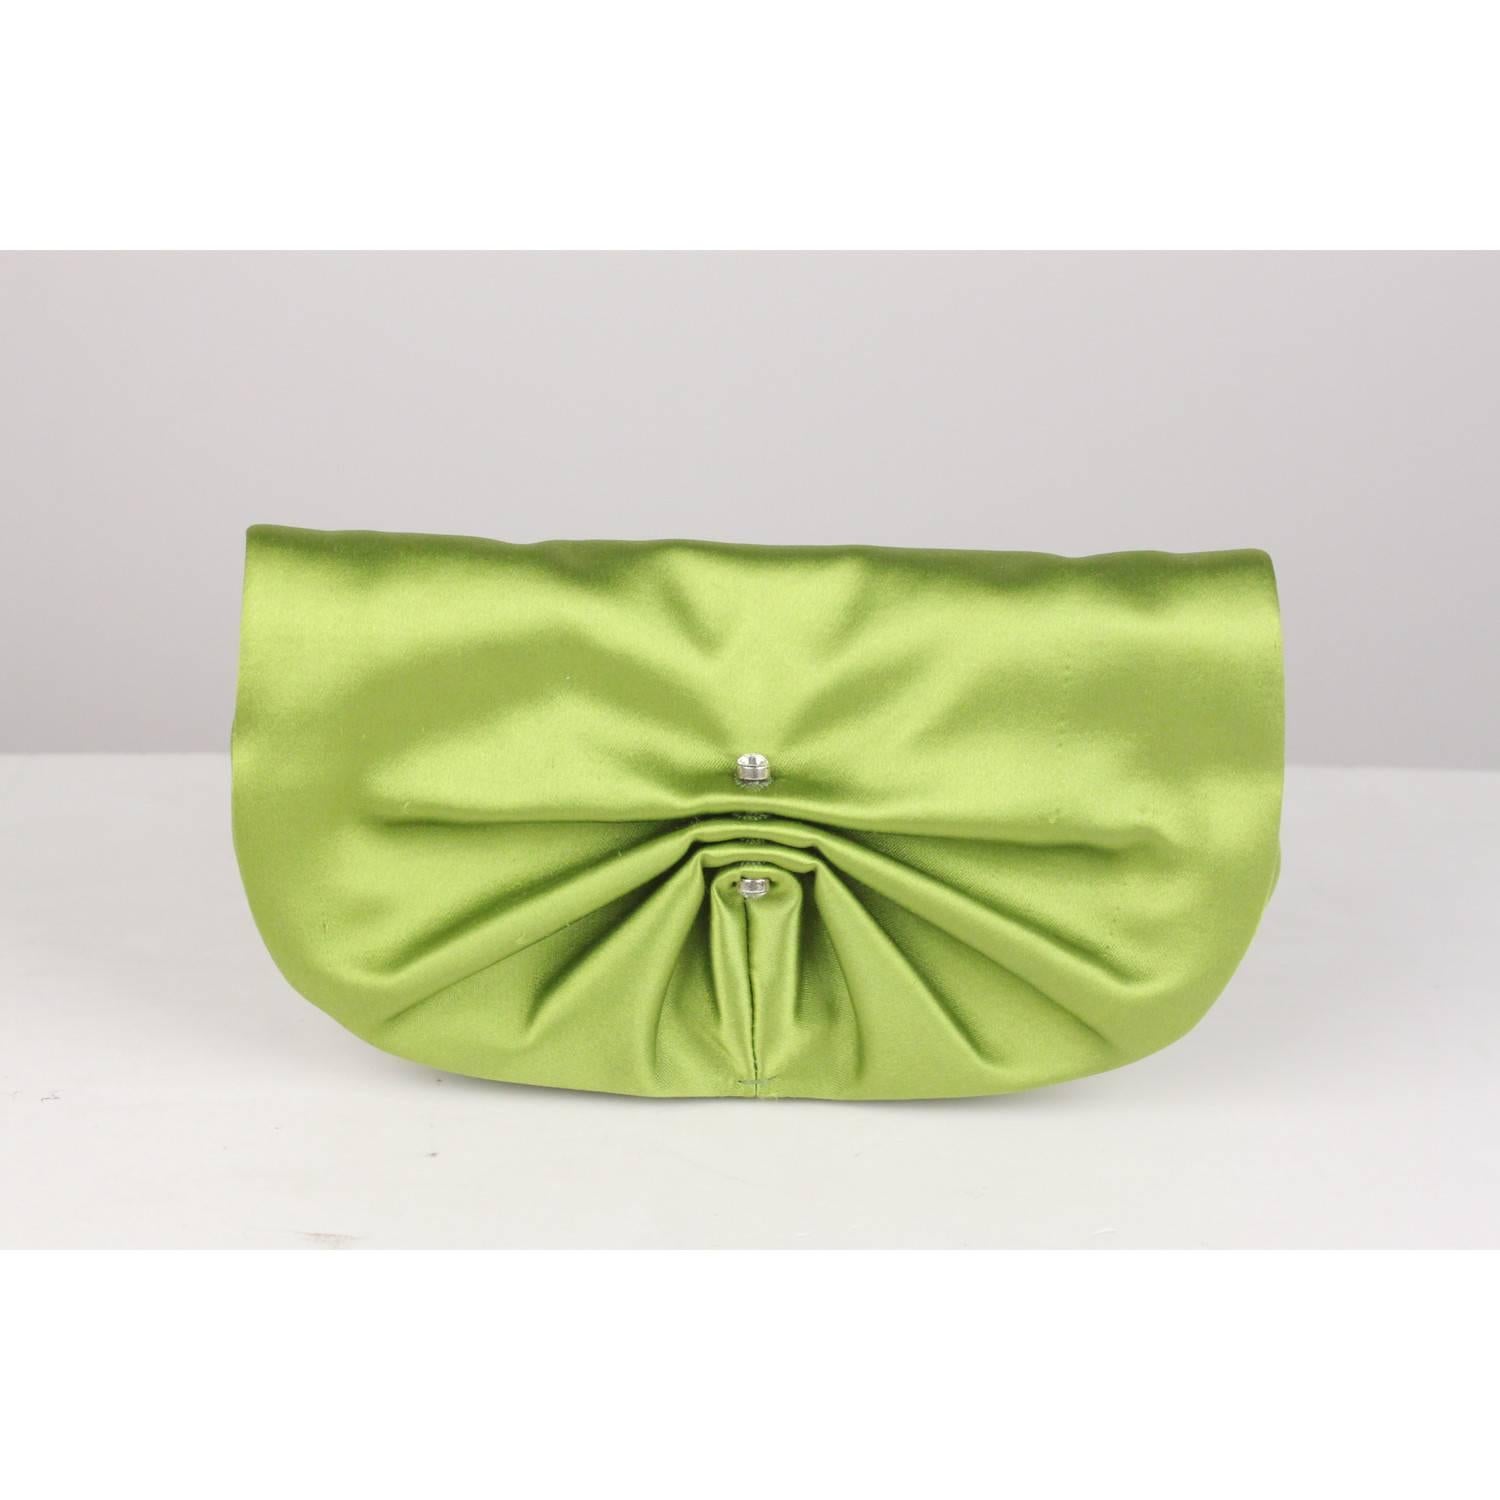 Sophisticated Yves Saint Laurent clutch bag in green satin. It features pleating on the flap, crystals detailing, flap with magnetic button closure and a small open pocket inside. 'YVES SAINT LAURENT Rive Gauche' embossed inside, serial number and